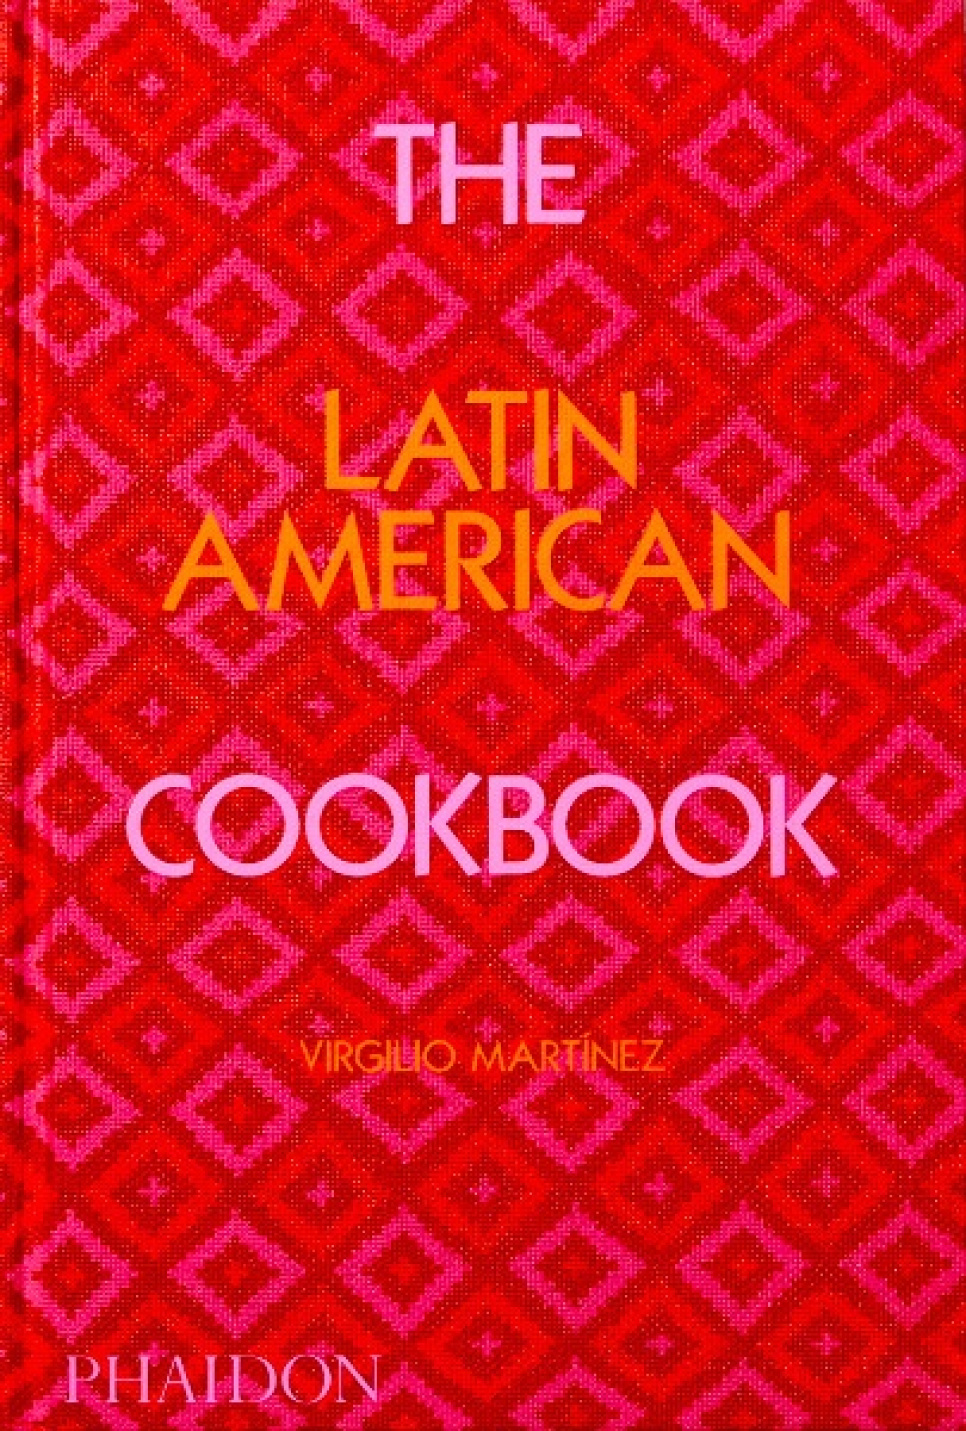 The Latin American Cookbook - Virgilio Martínez in the group Cooking / Cookbooks / National & regional cuisines / South & Latin America at KitchenLab (1987-26131)